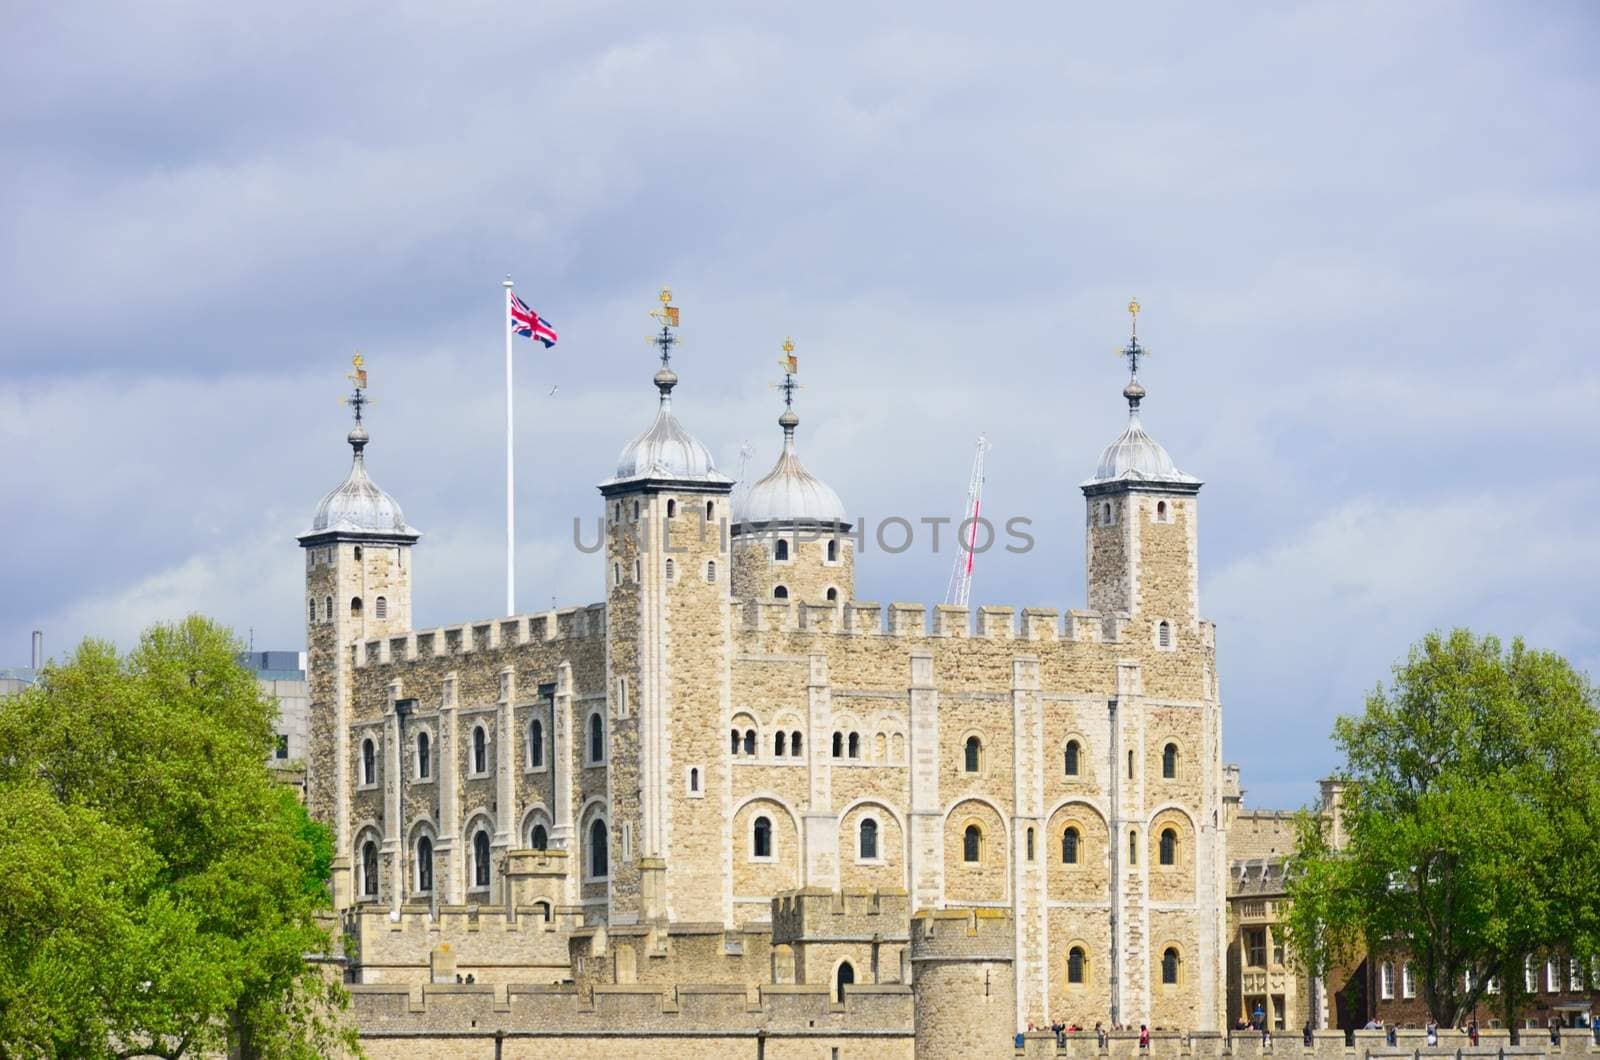 Tower of London by pauws99